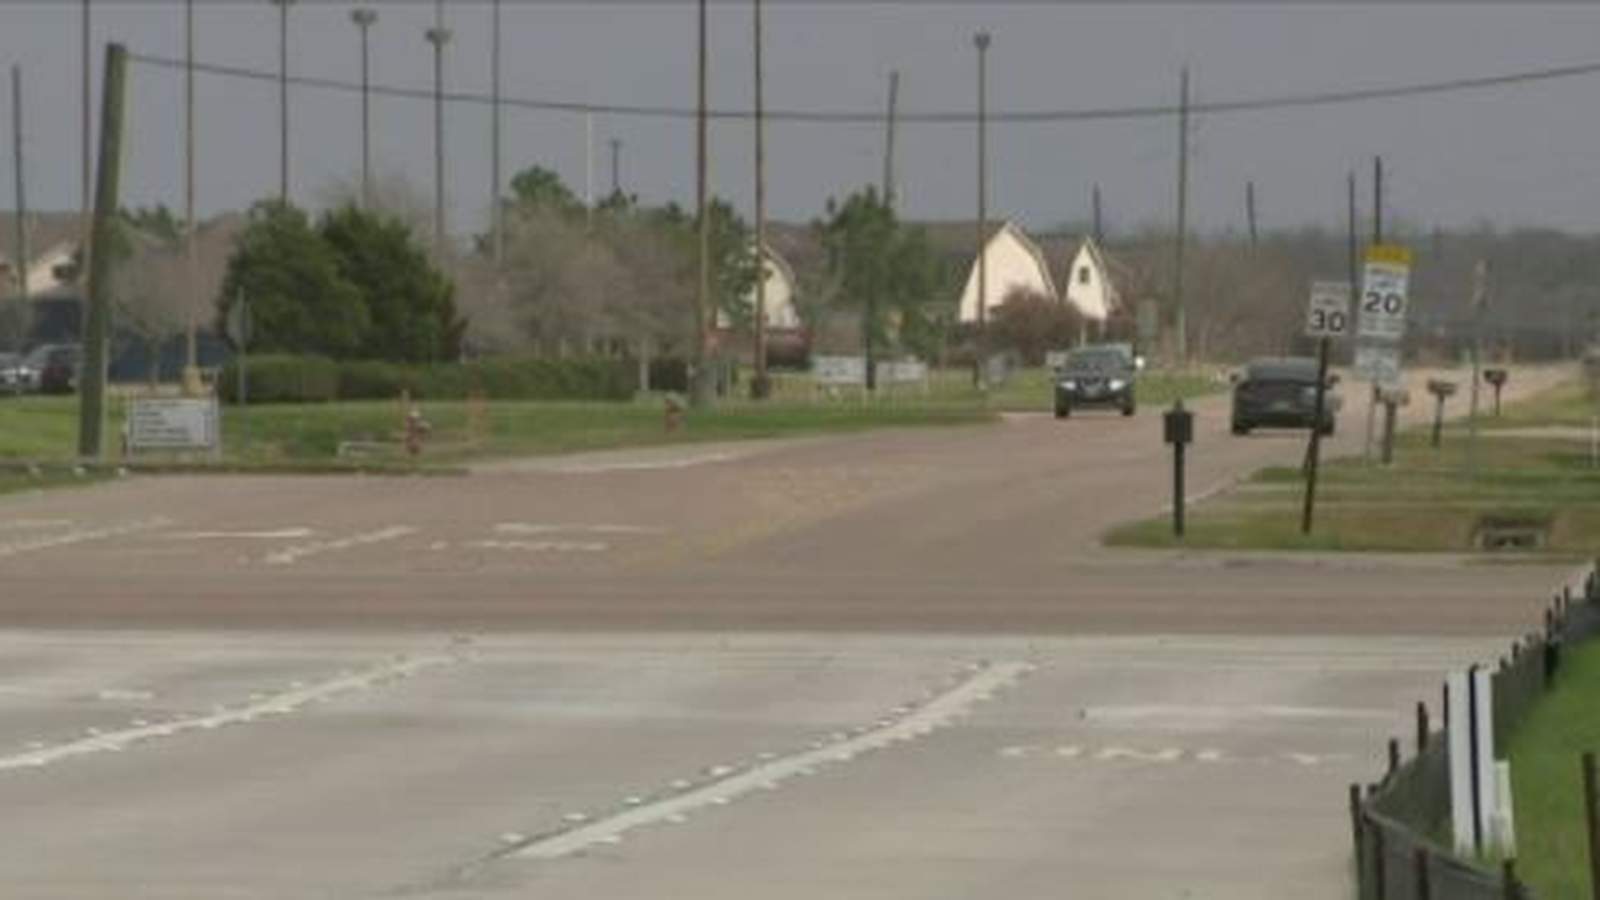 New roadway expansion underway in Brazoria County as area continues to grow